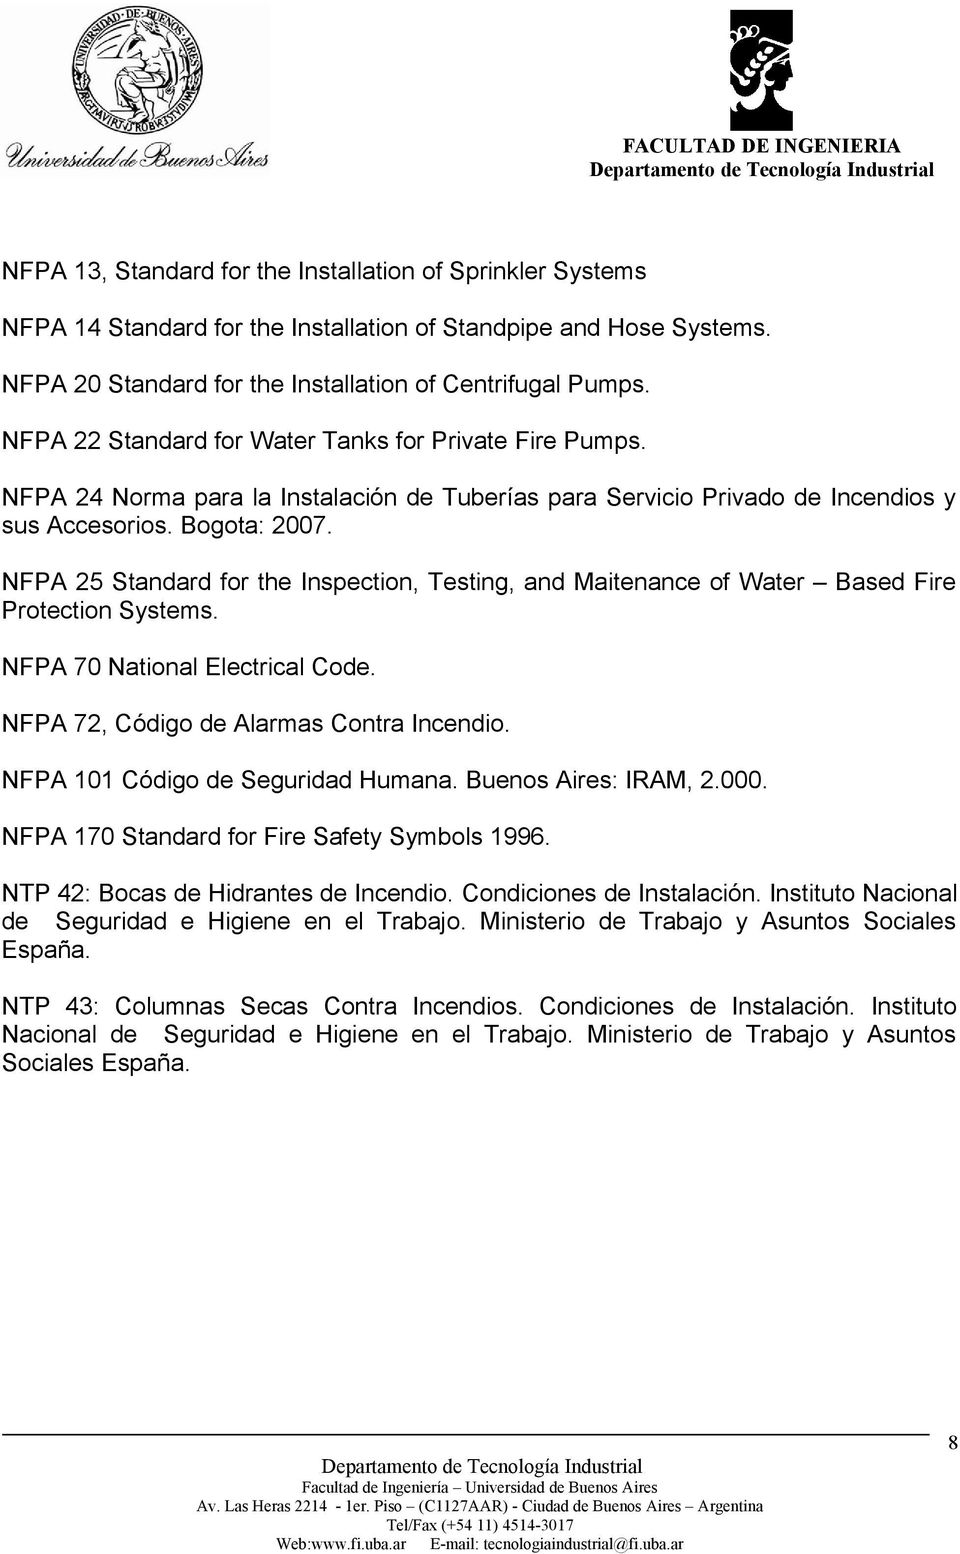 NFPA 25 Standard for the Inspection, Testing, and Maitenance of Water Based Fire Protection Systems. NFPA 70 National Electrical Code. NFPA 72, Código de Alarmas Contra Incendio.